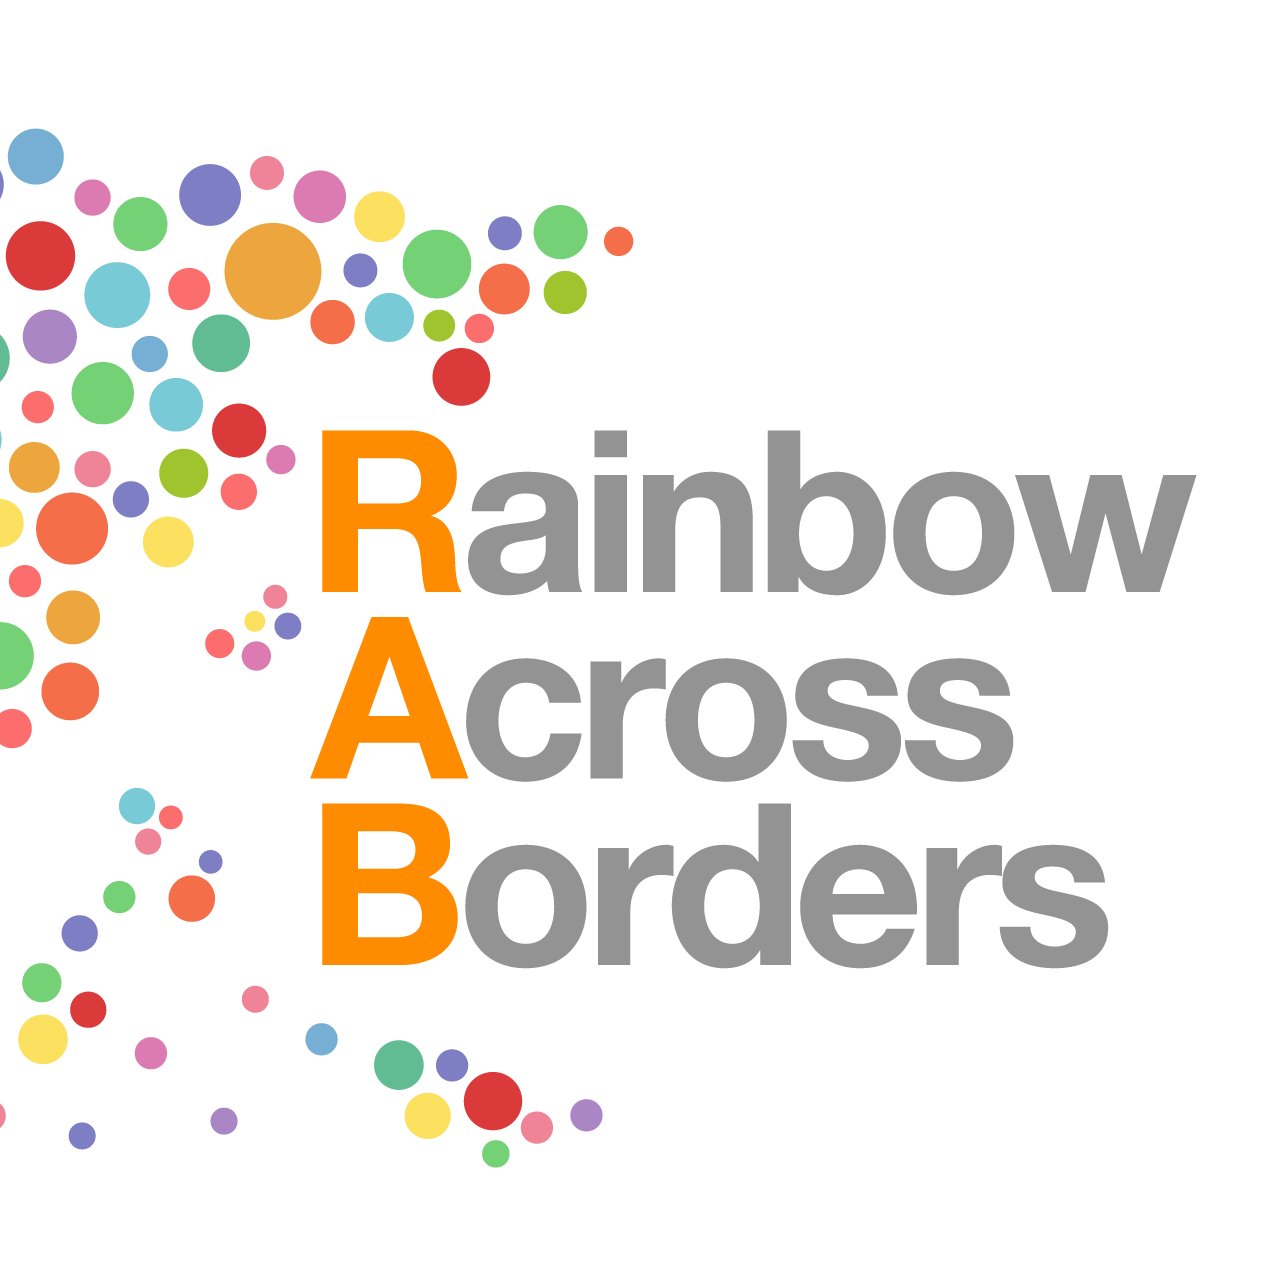 Rainbow Across Borders (RAB) is Asia’s first regional patient support group alliance promoting empowerment, advocacy and awareness through collaboration.